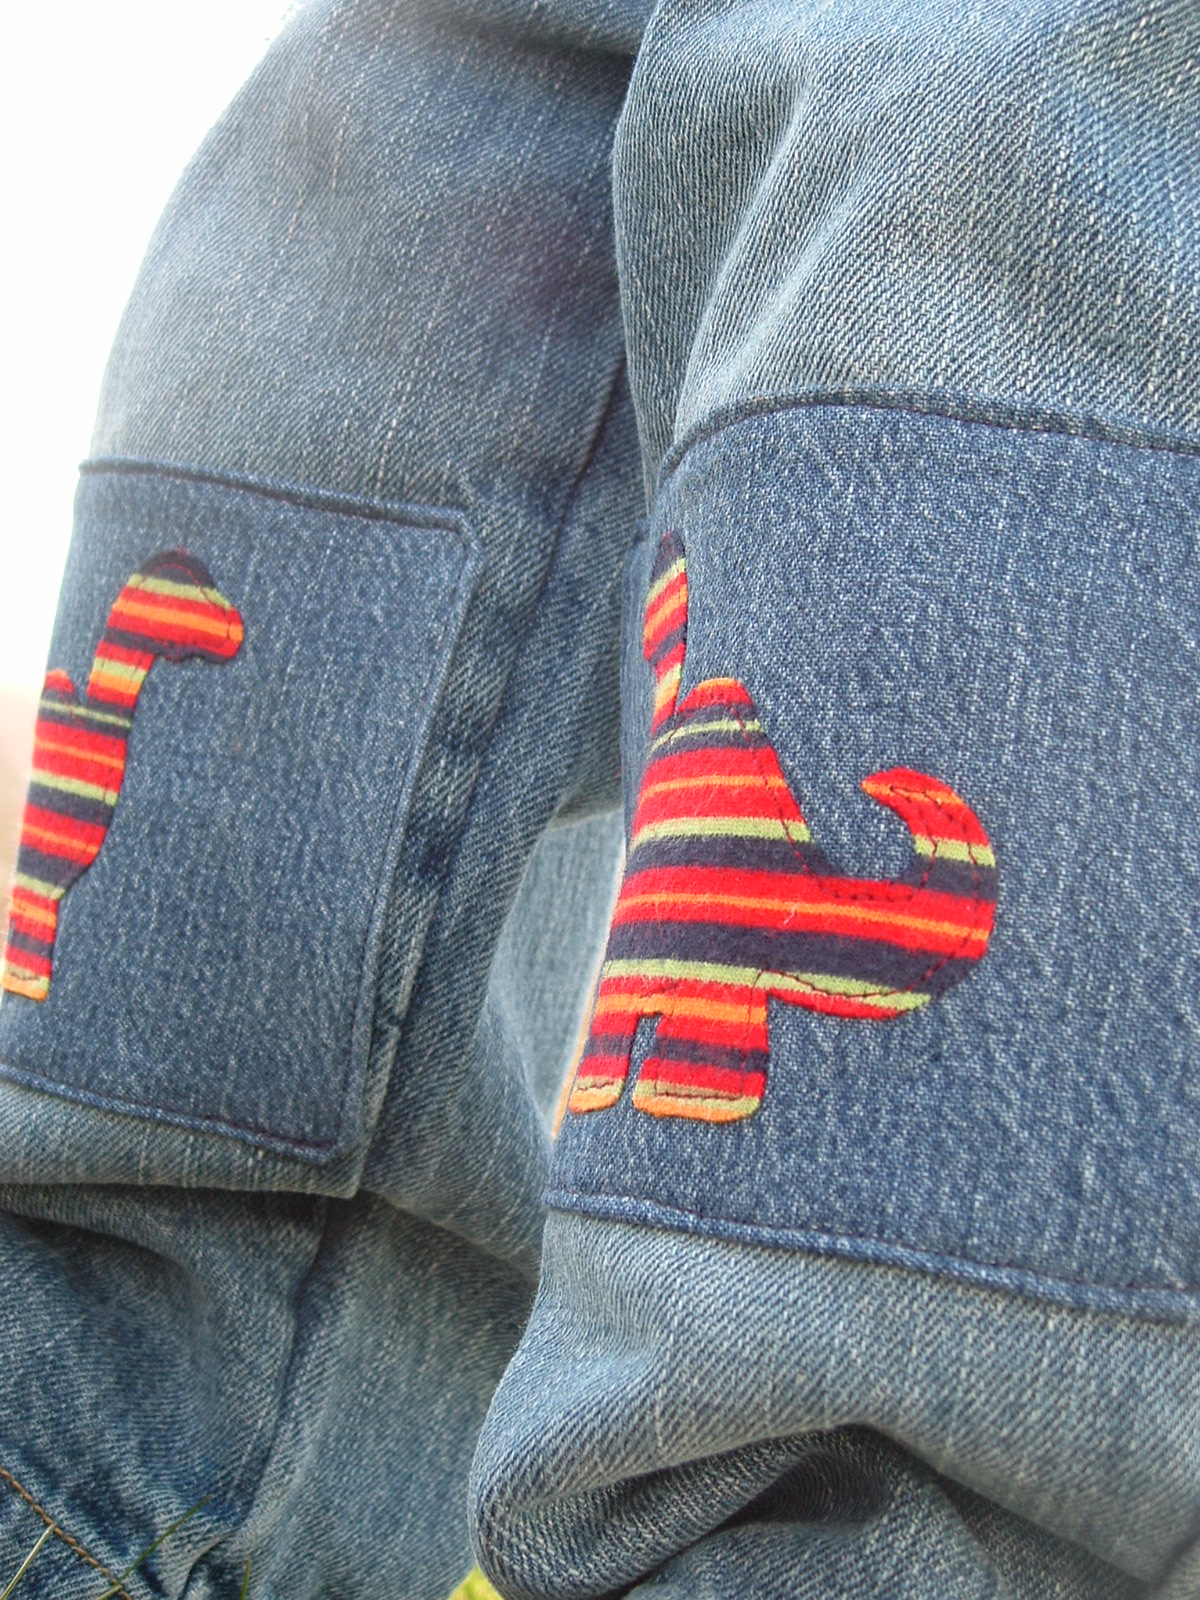 Pieces by Polly: Dino Knee Patches Tutorial - Hand-Me-Down REHAB